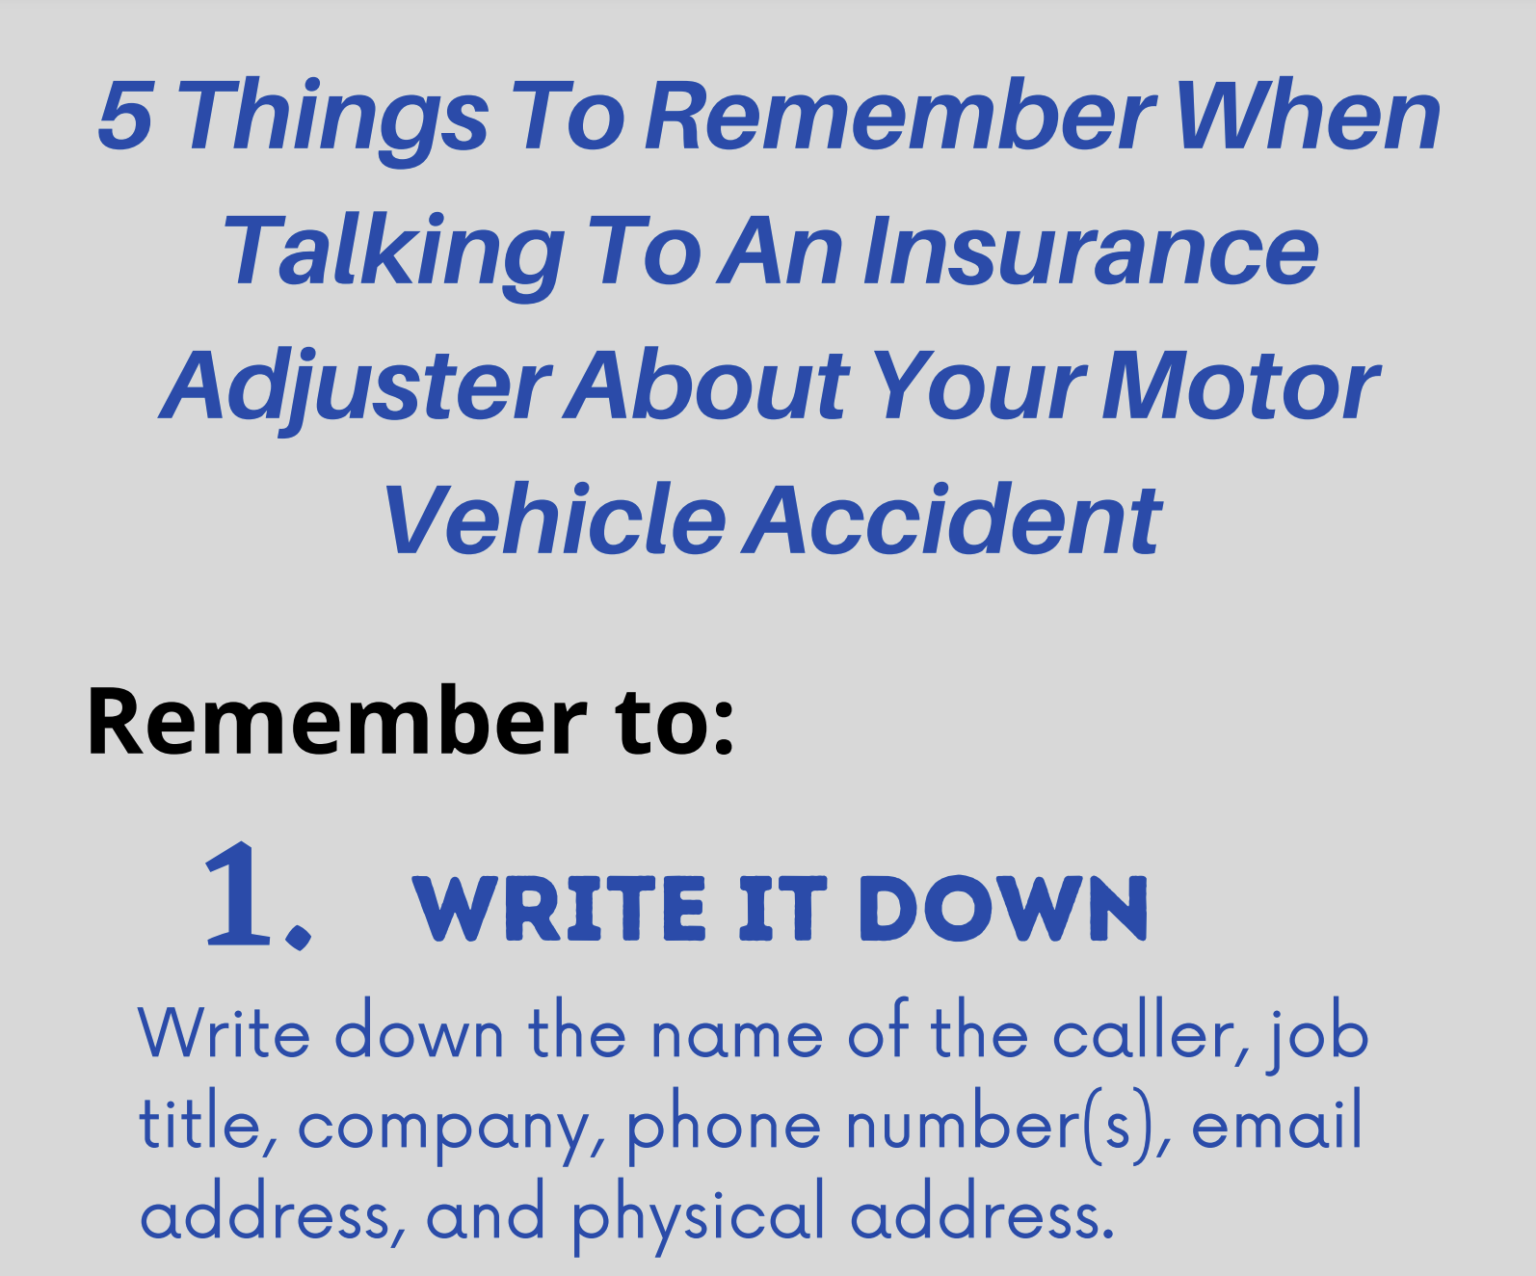 5 Things To Remember When Talking To An Insurance Adjuster About Your Motor Vehicle Accident